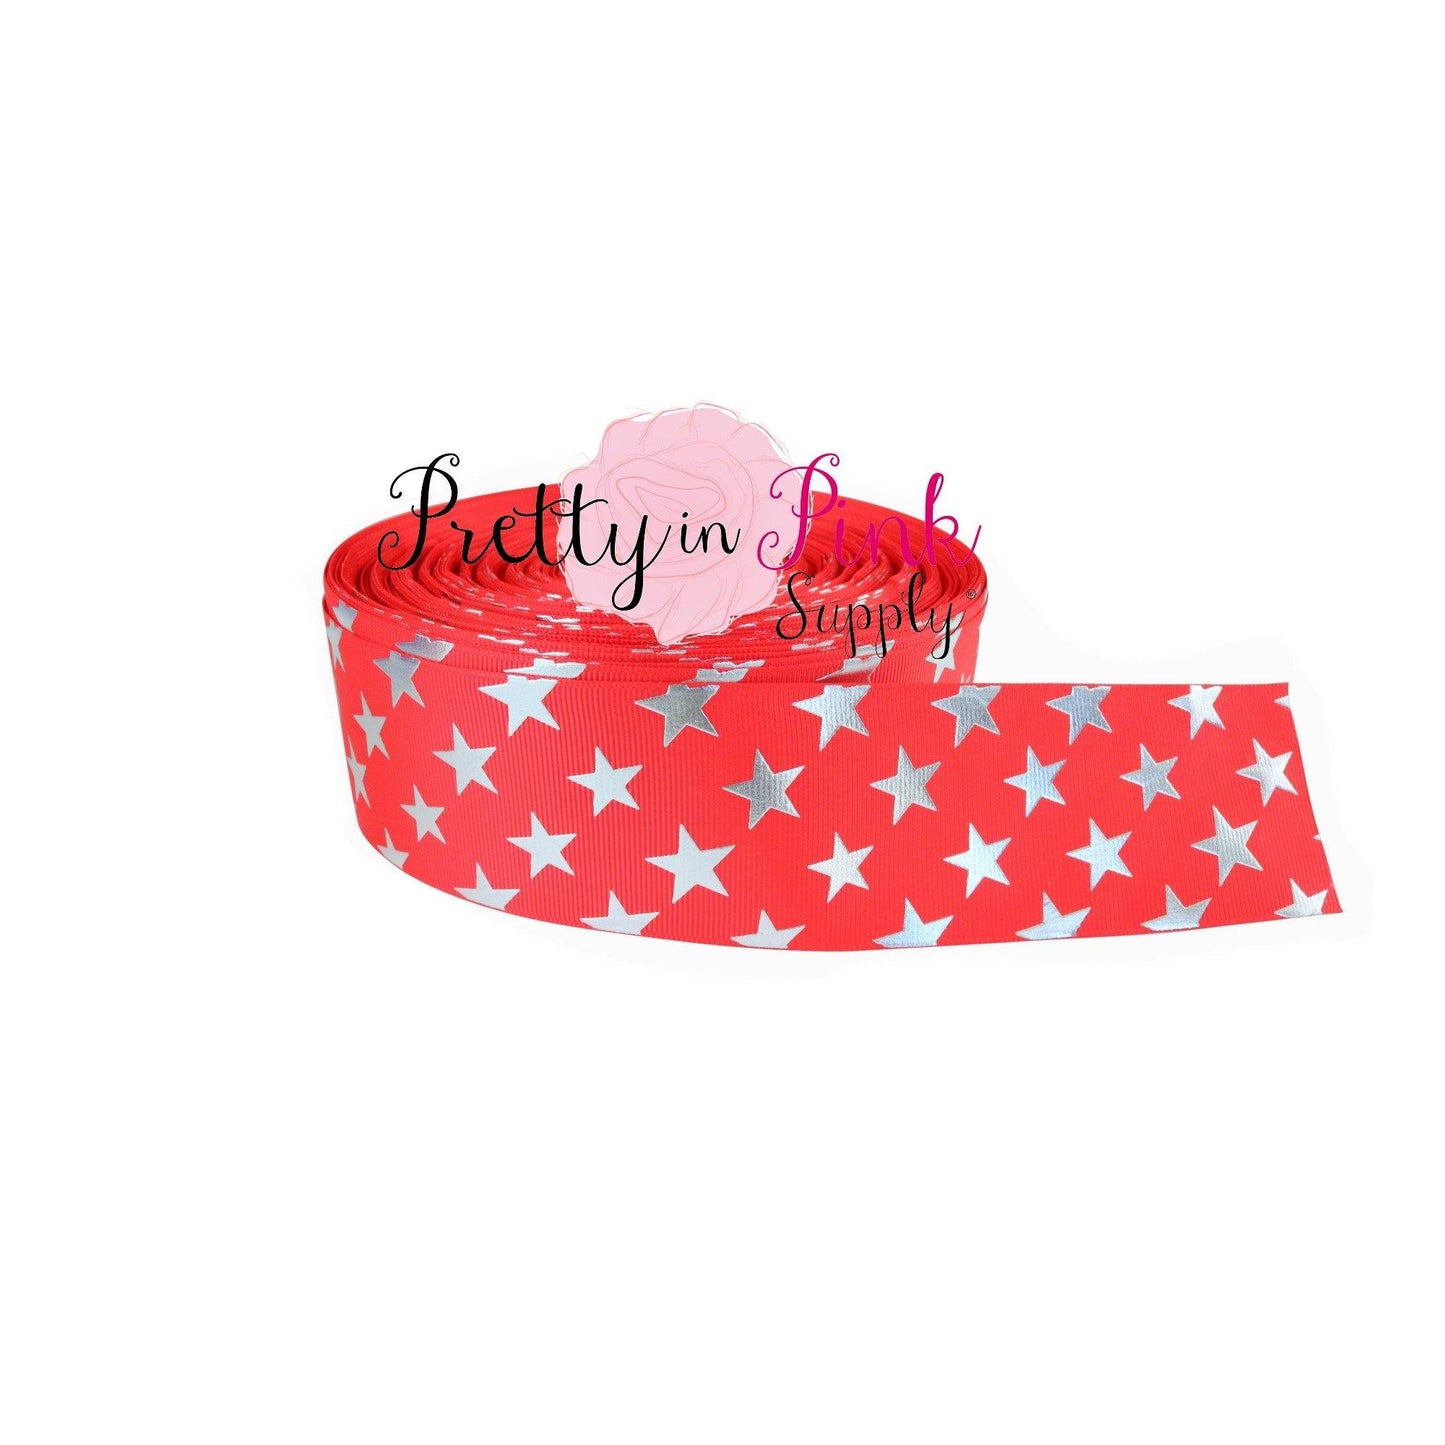 2" Red Silver Star Grosgrain Ribbon - Pretty in Pink Supply